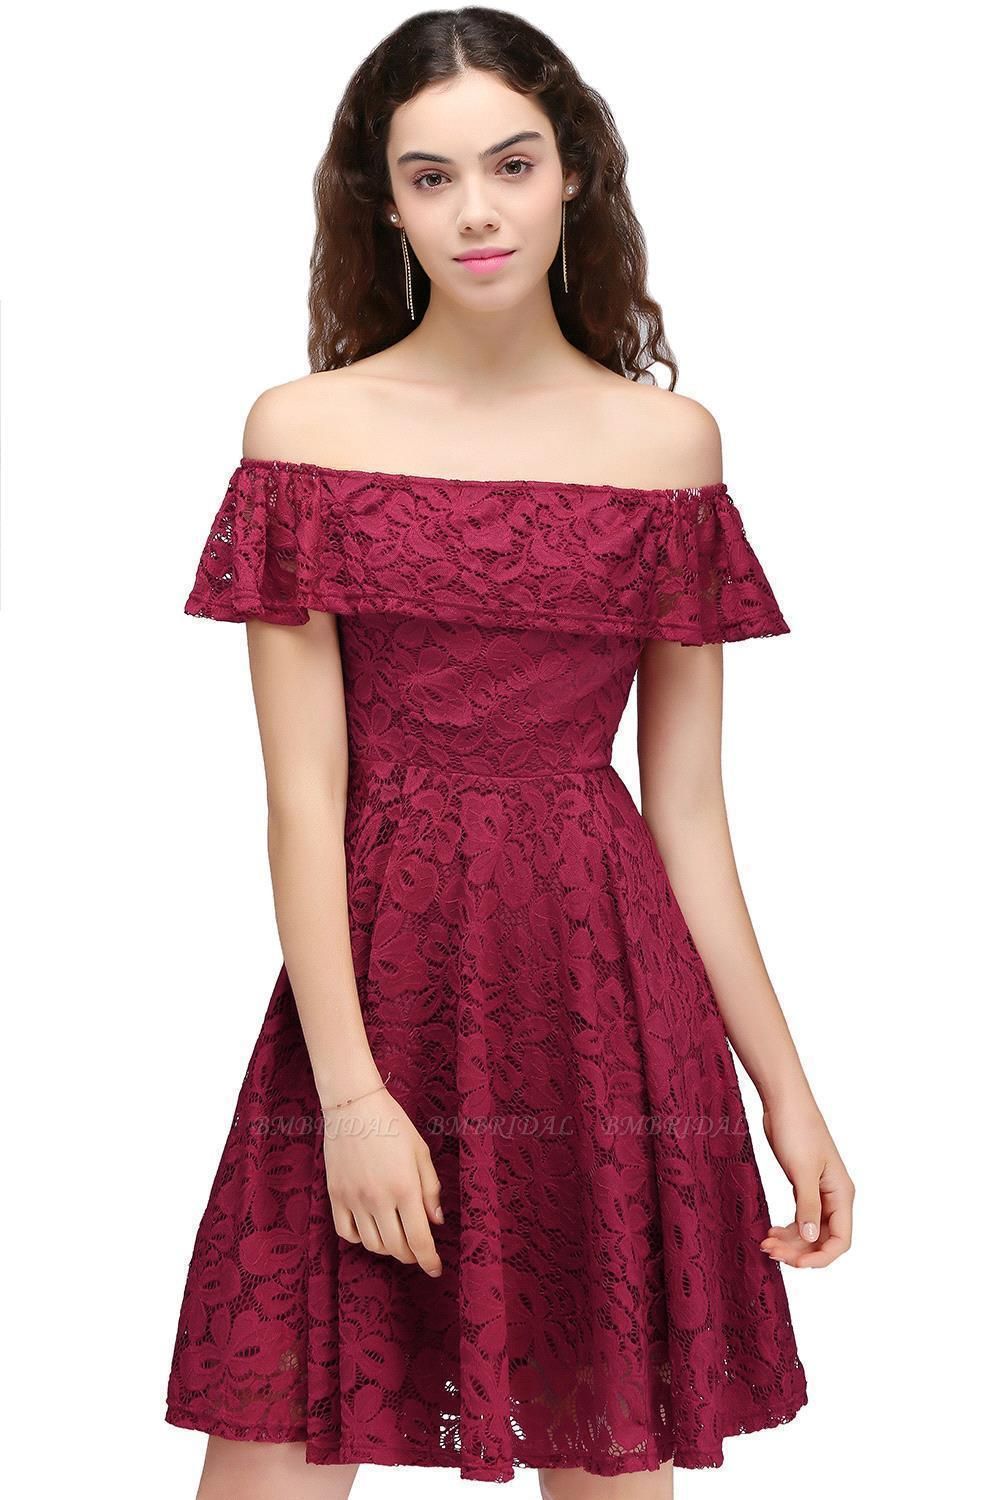 BMbridal A-Line Off-the-shoulder Lace Burgundy Homecoming Dress